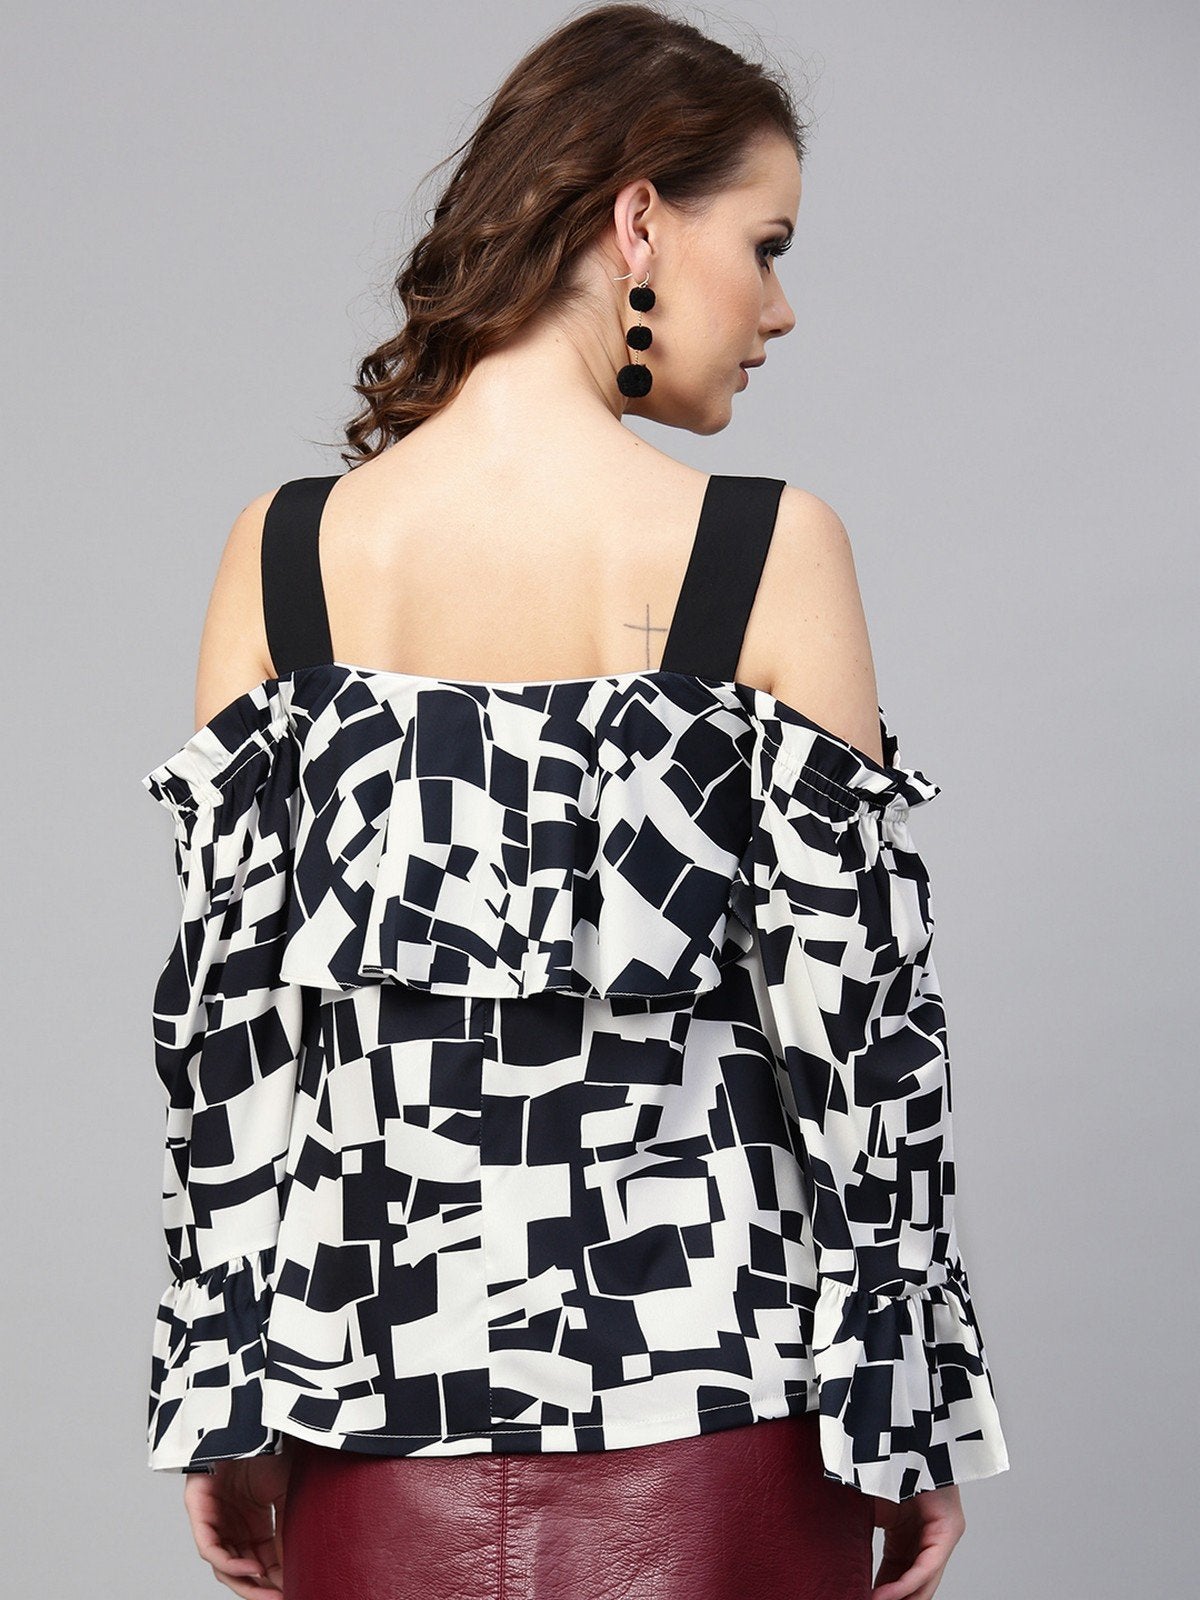 Women's Abstract Print Top - Pannkh